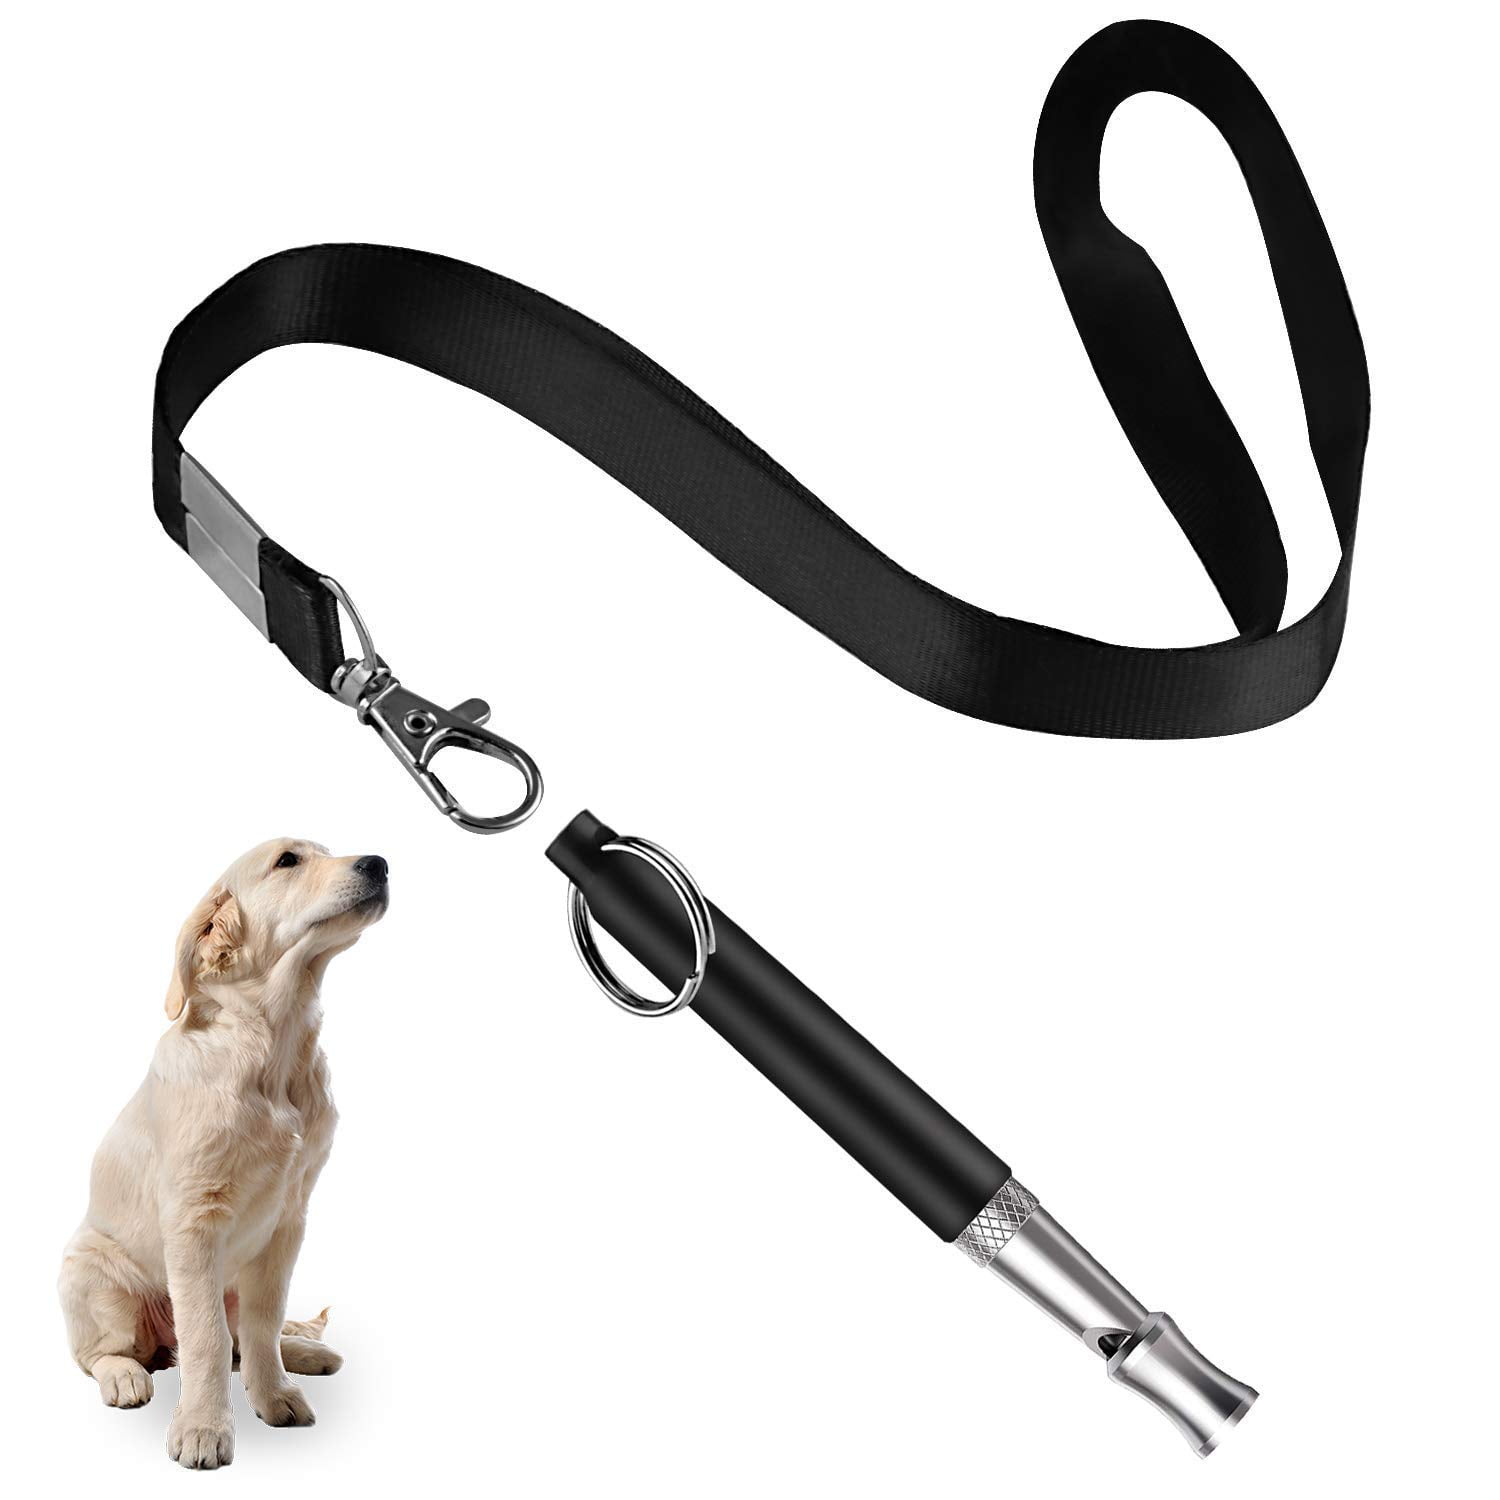 2 Pack Dog Whistle Adjustable Pitch Ultrasonic Dog Whistles Training for Dog to Stop Barking Recall Professional Silent Dog Whistle Training Barking Control Devices for Dog,with Black Strap Lanyard 